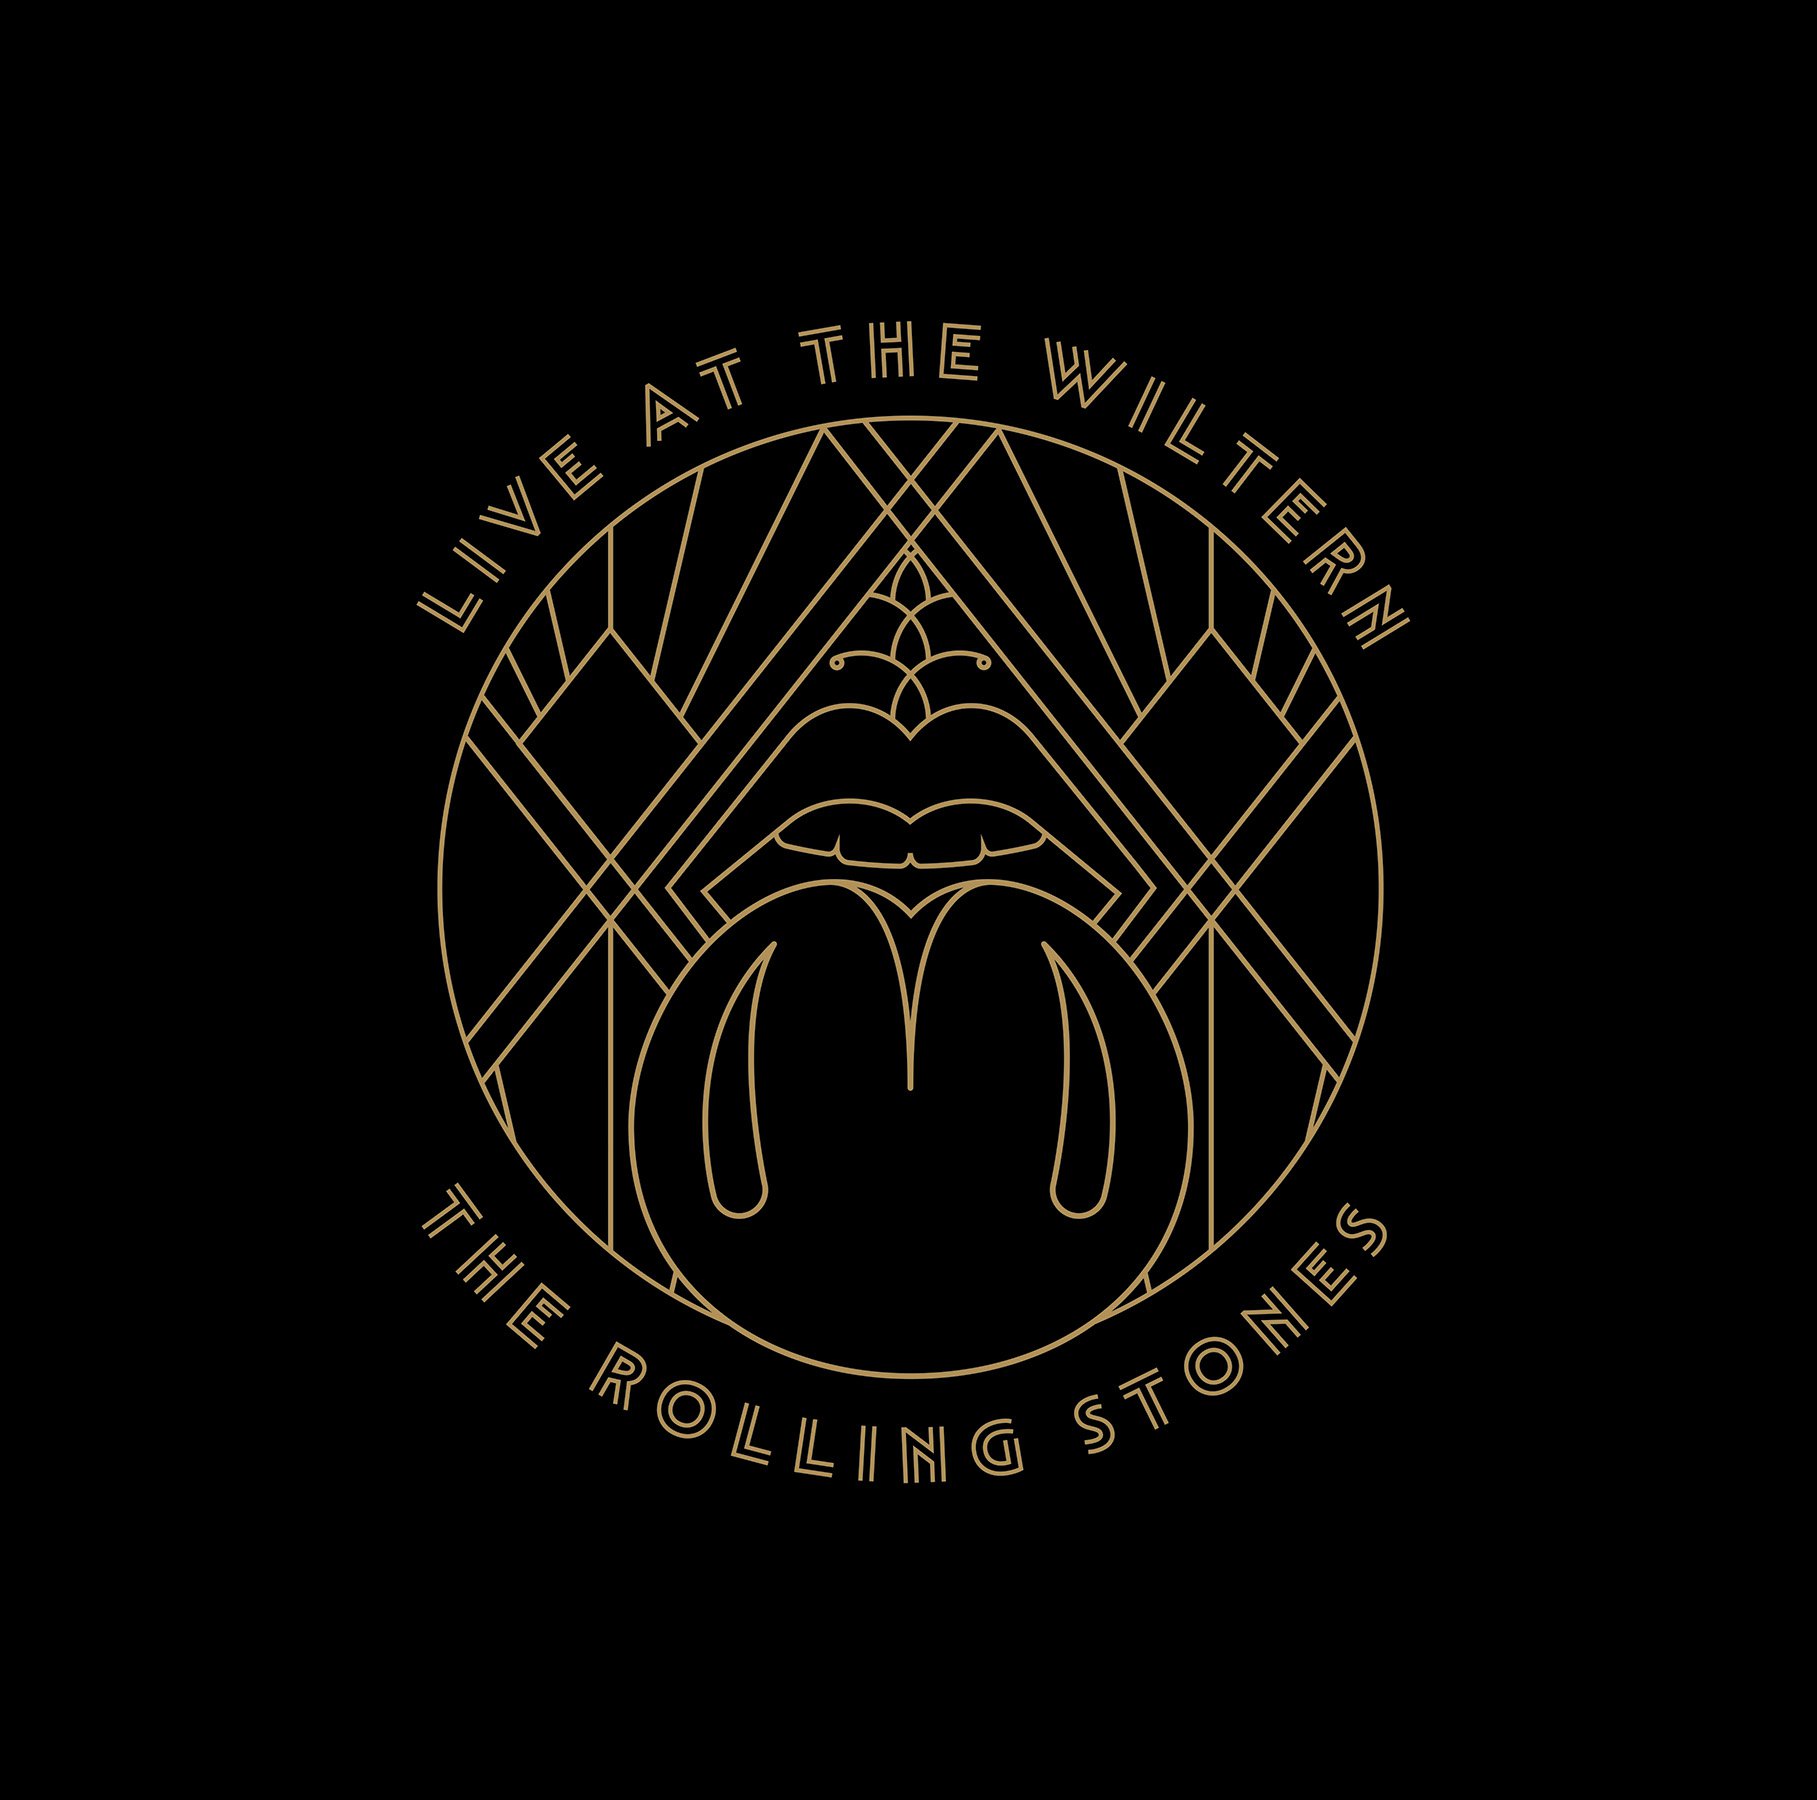 "The Rolling Stones Live at the Wiltern", fot. Universal Music